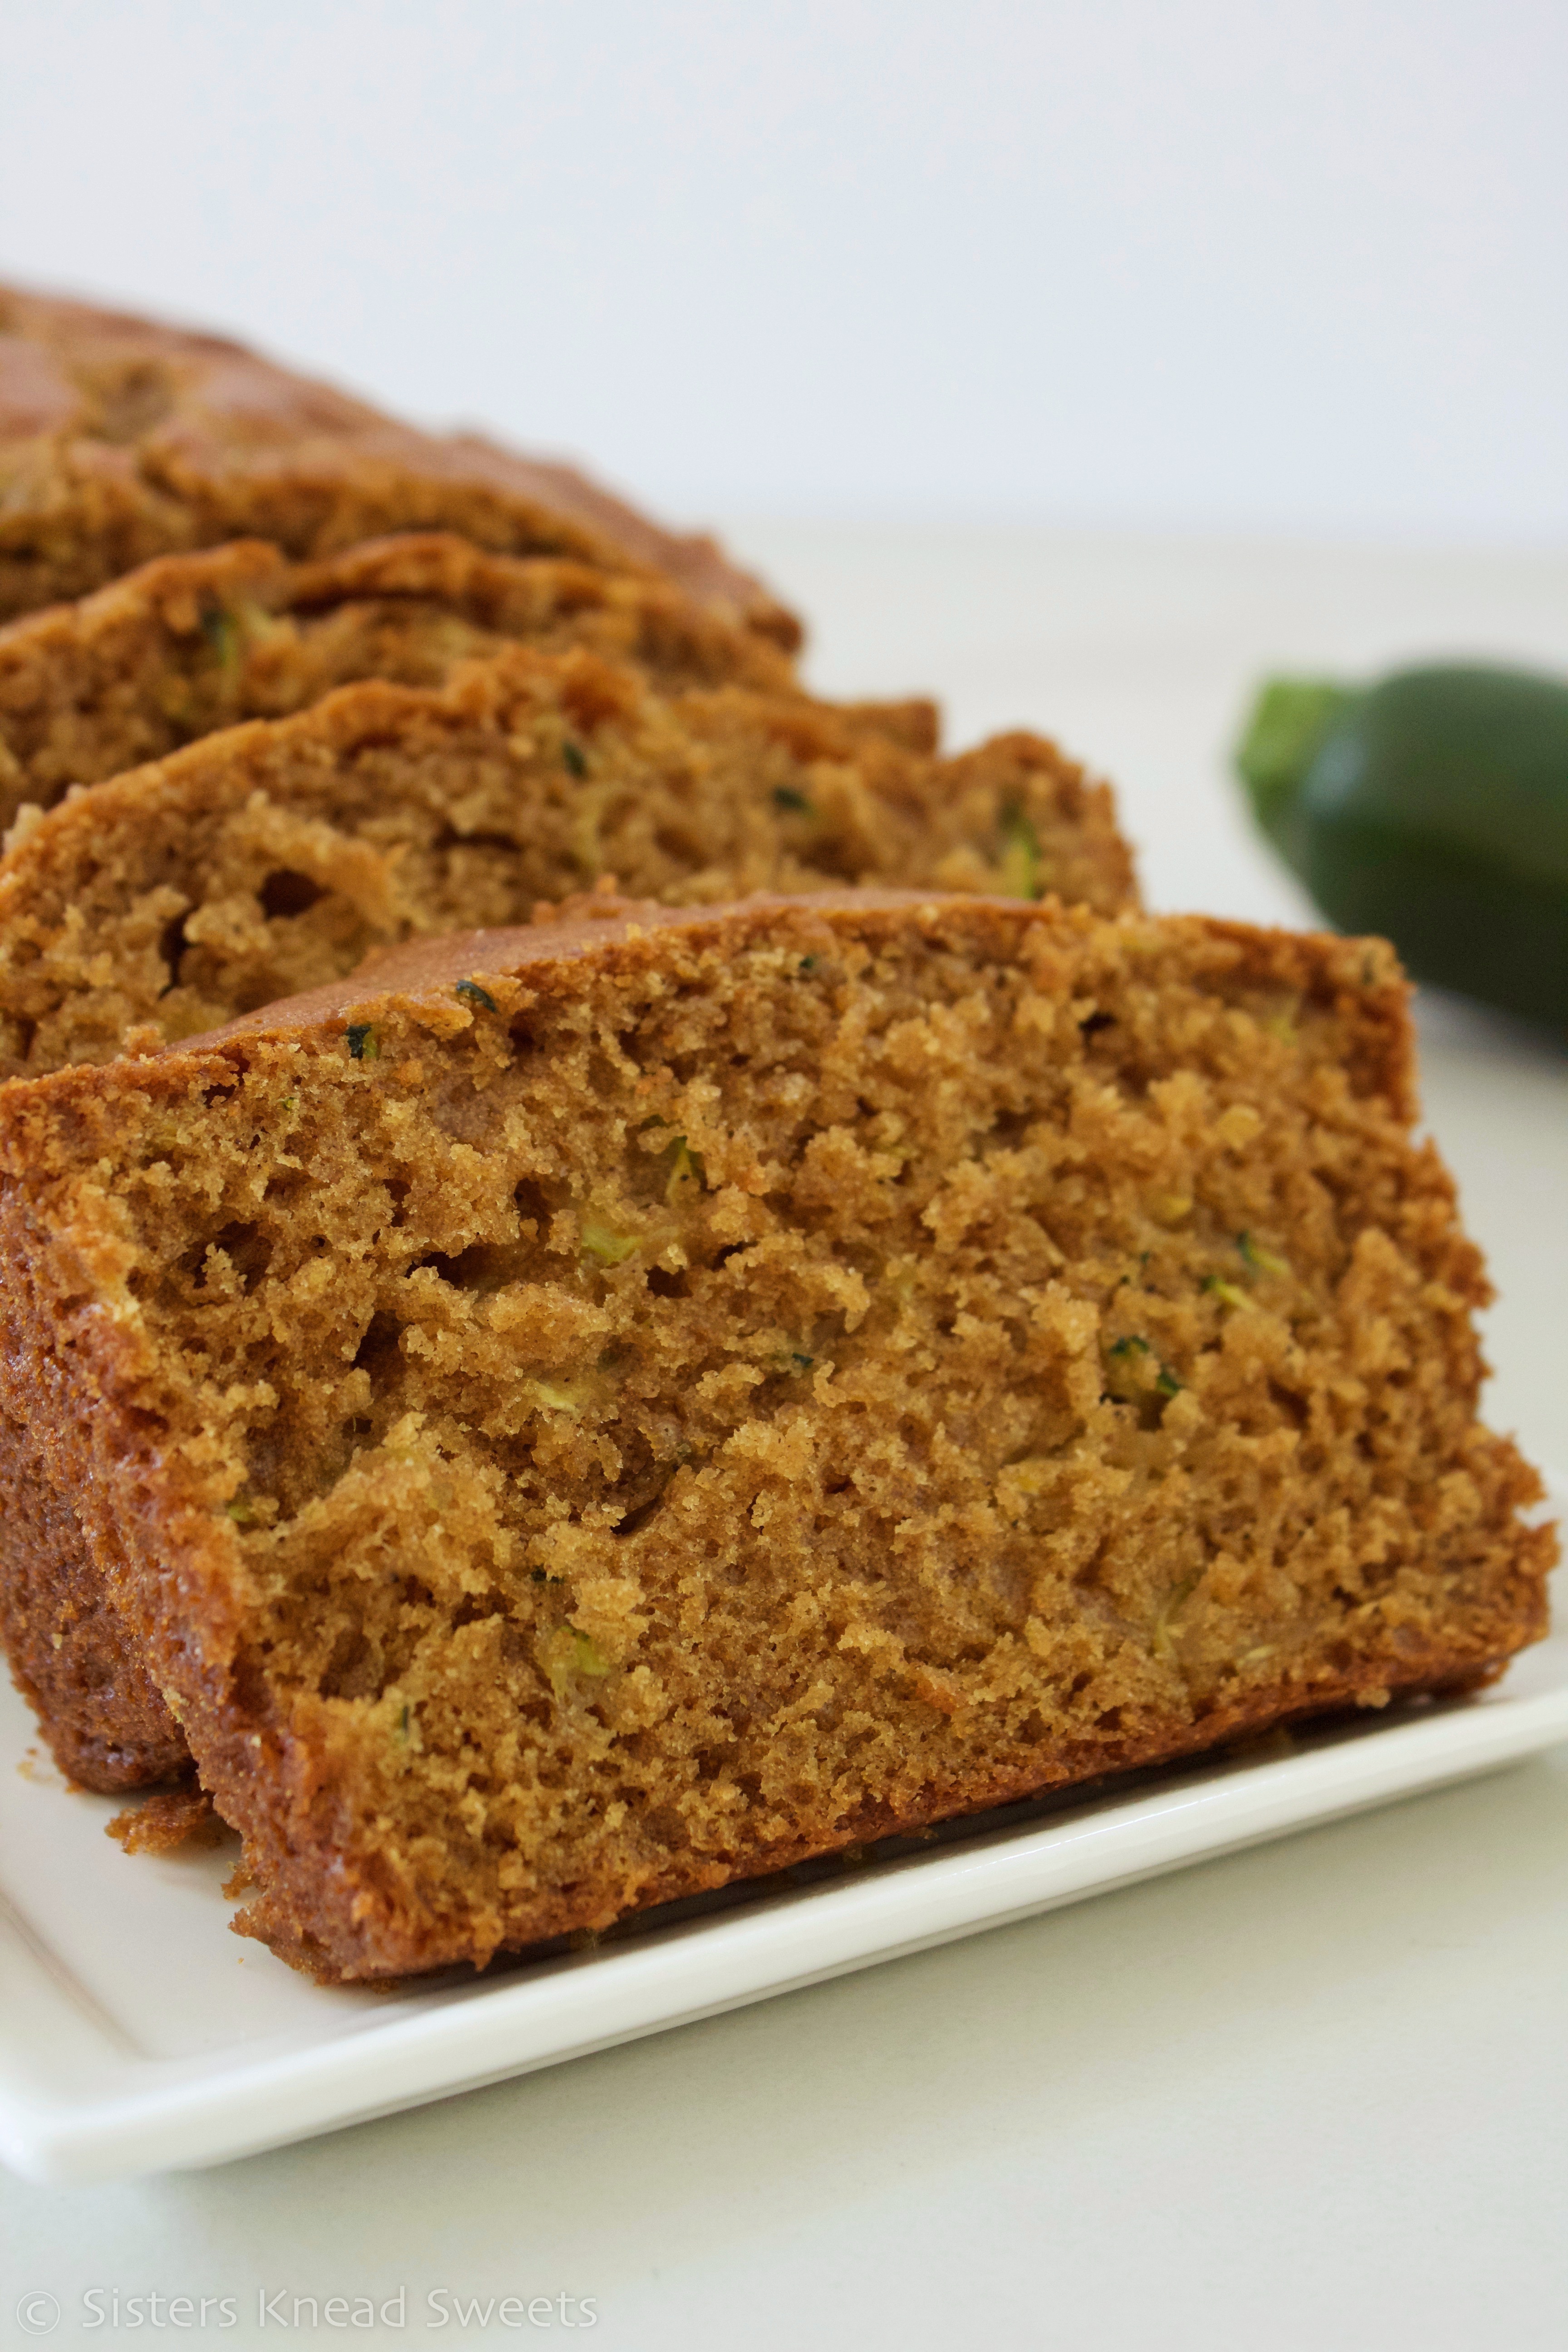 zucchini bread pic 1 – Sisters Knead Sweets